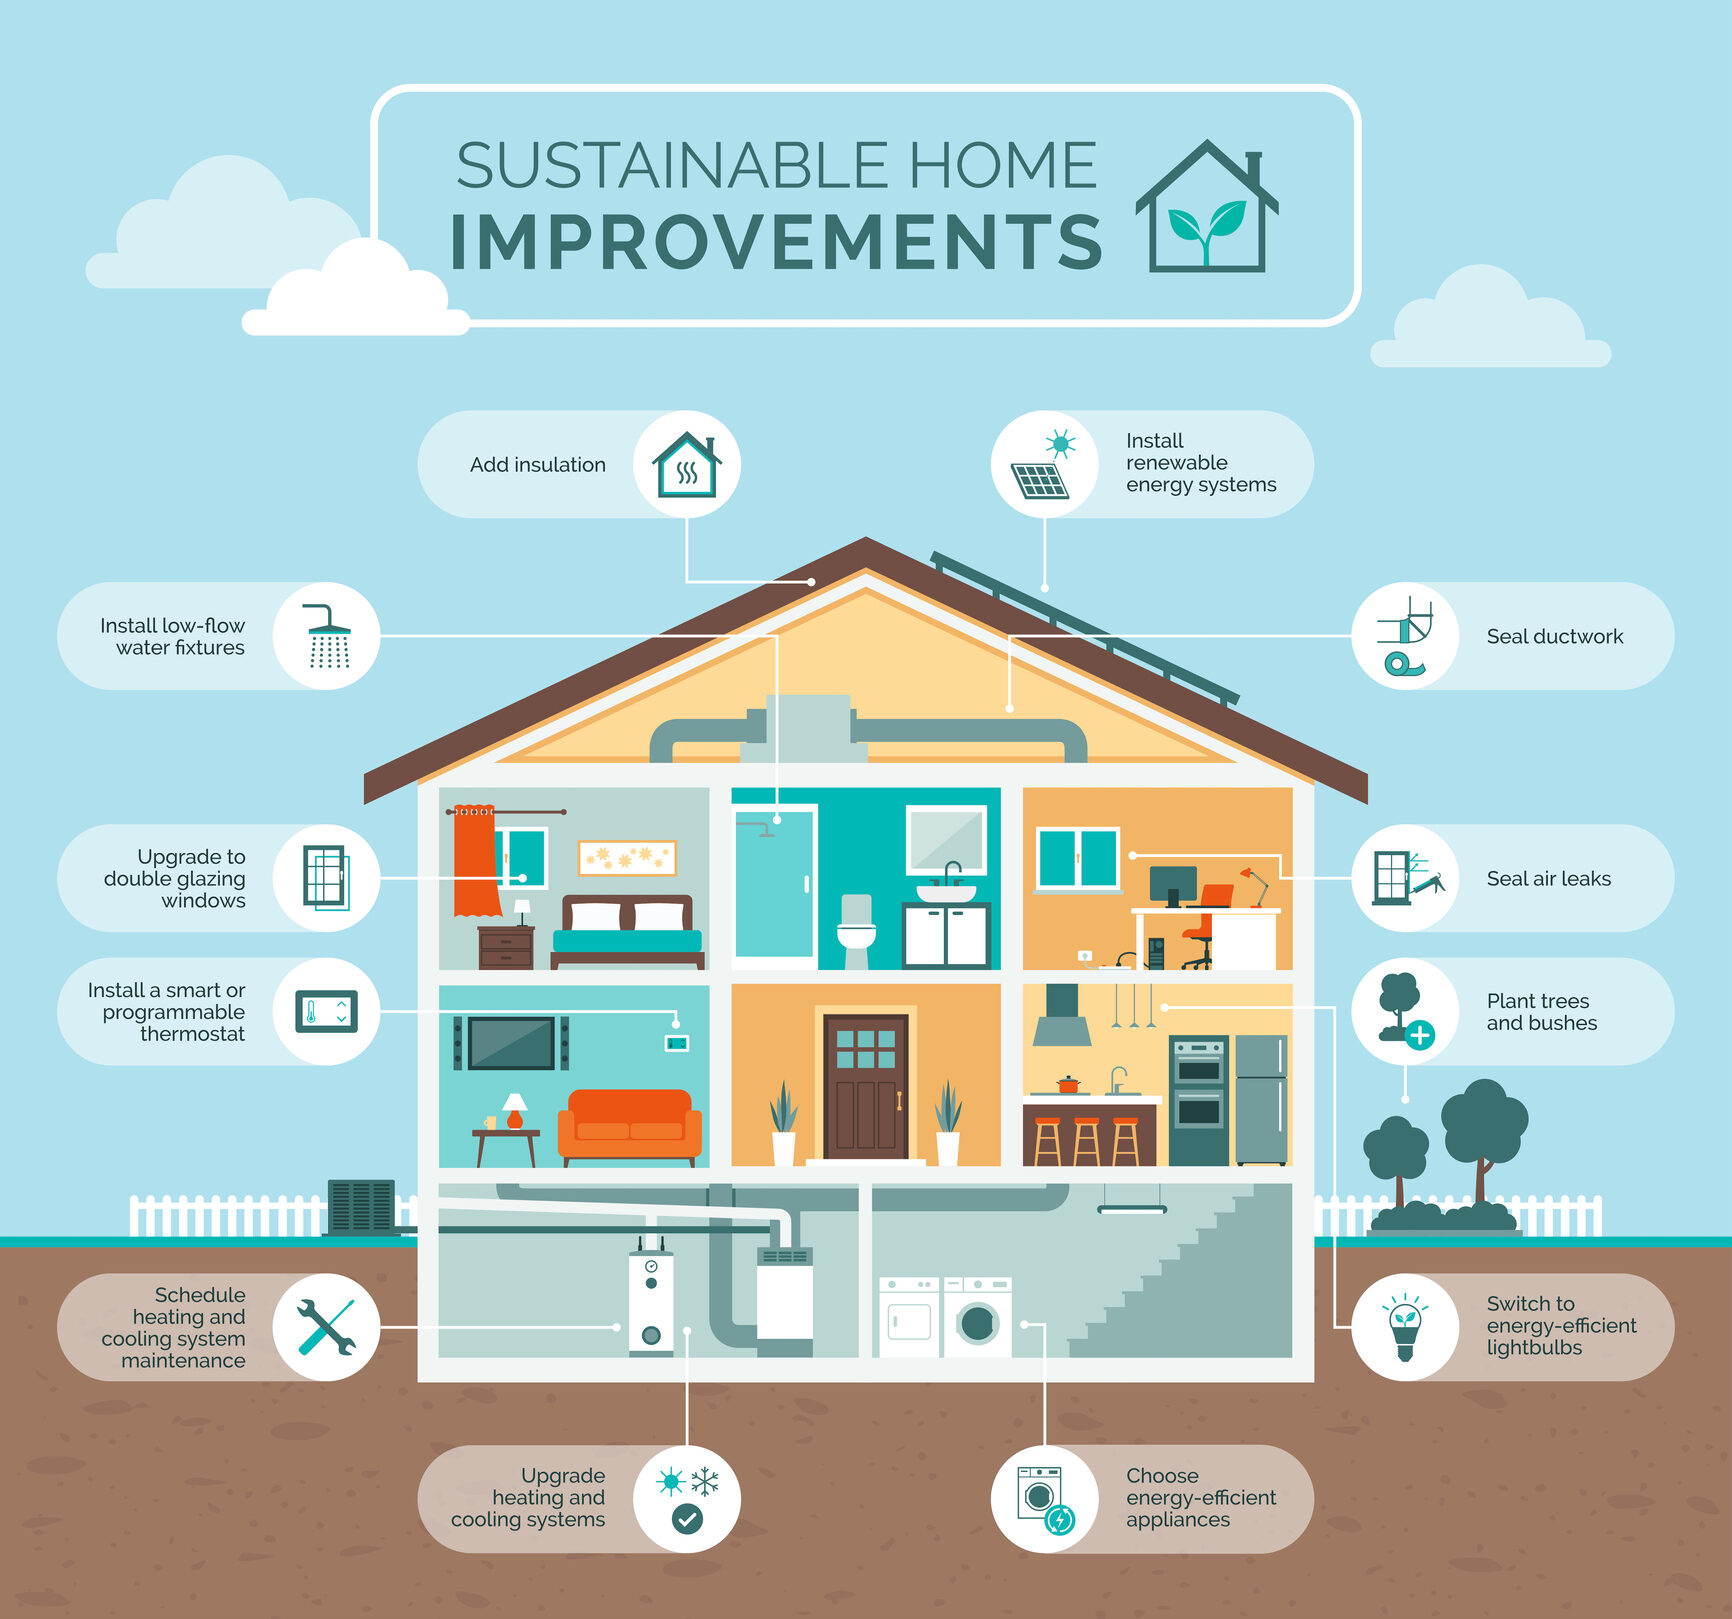 Tips for Improving Energy Efficiency in HVAC - Fixes that will reduce utility bills and improve your home.